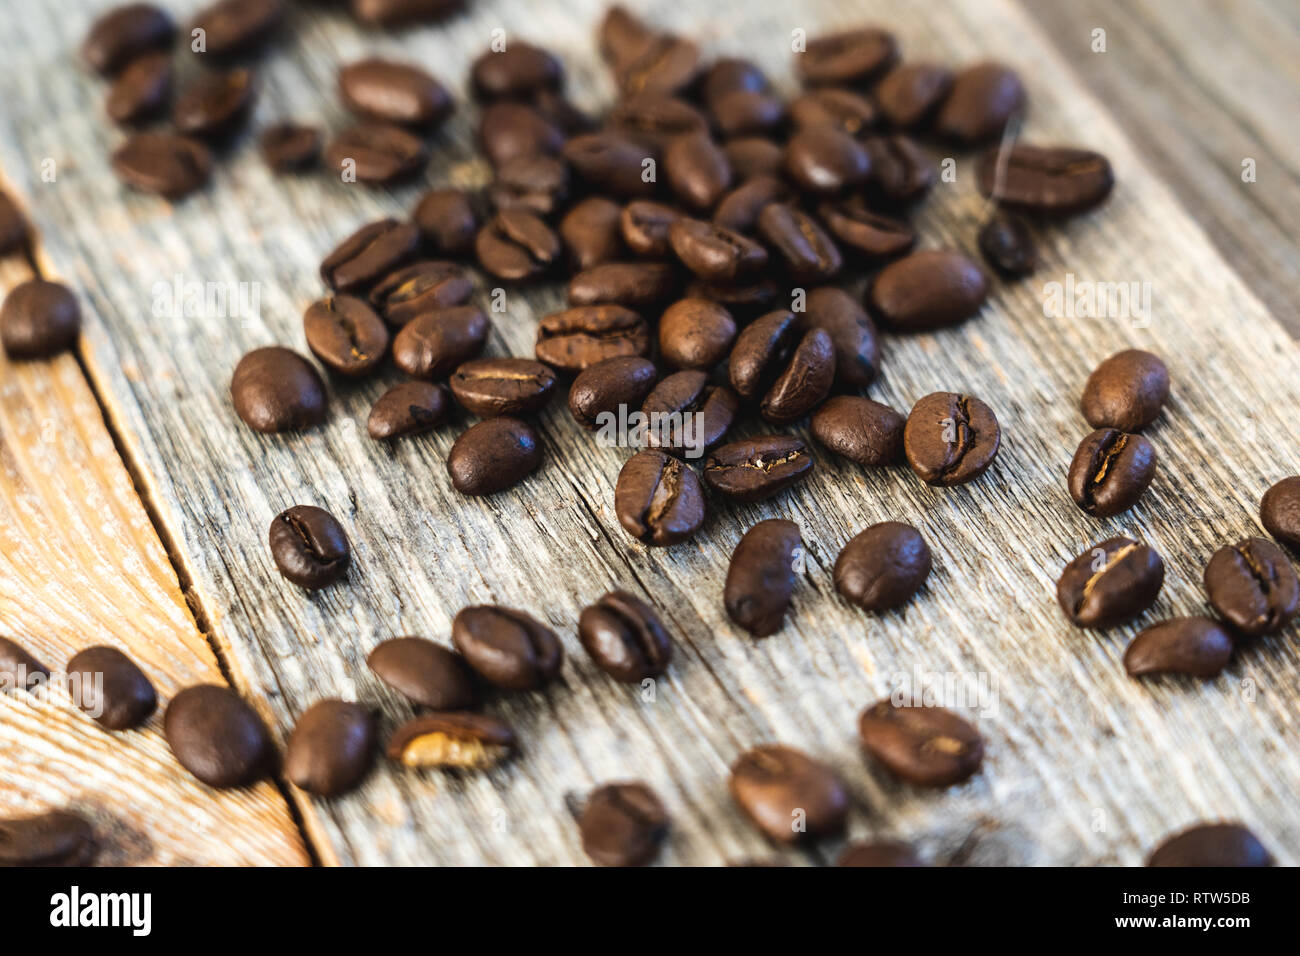 Close-up shot of roasted coffee beans on rustic wooden boards Stock Photo